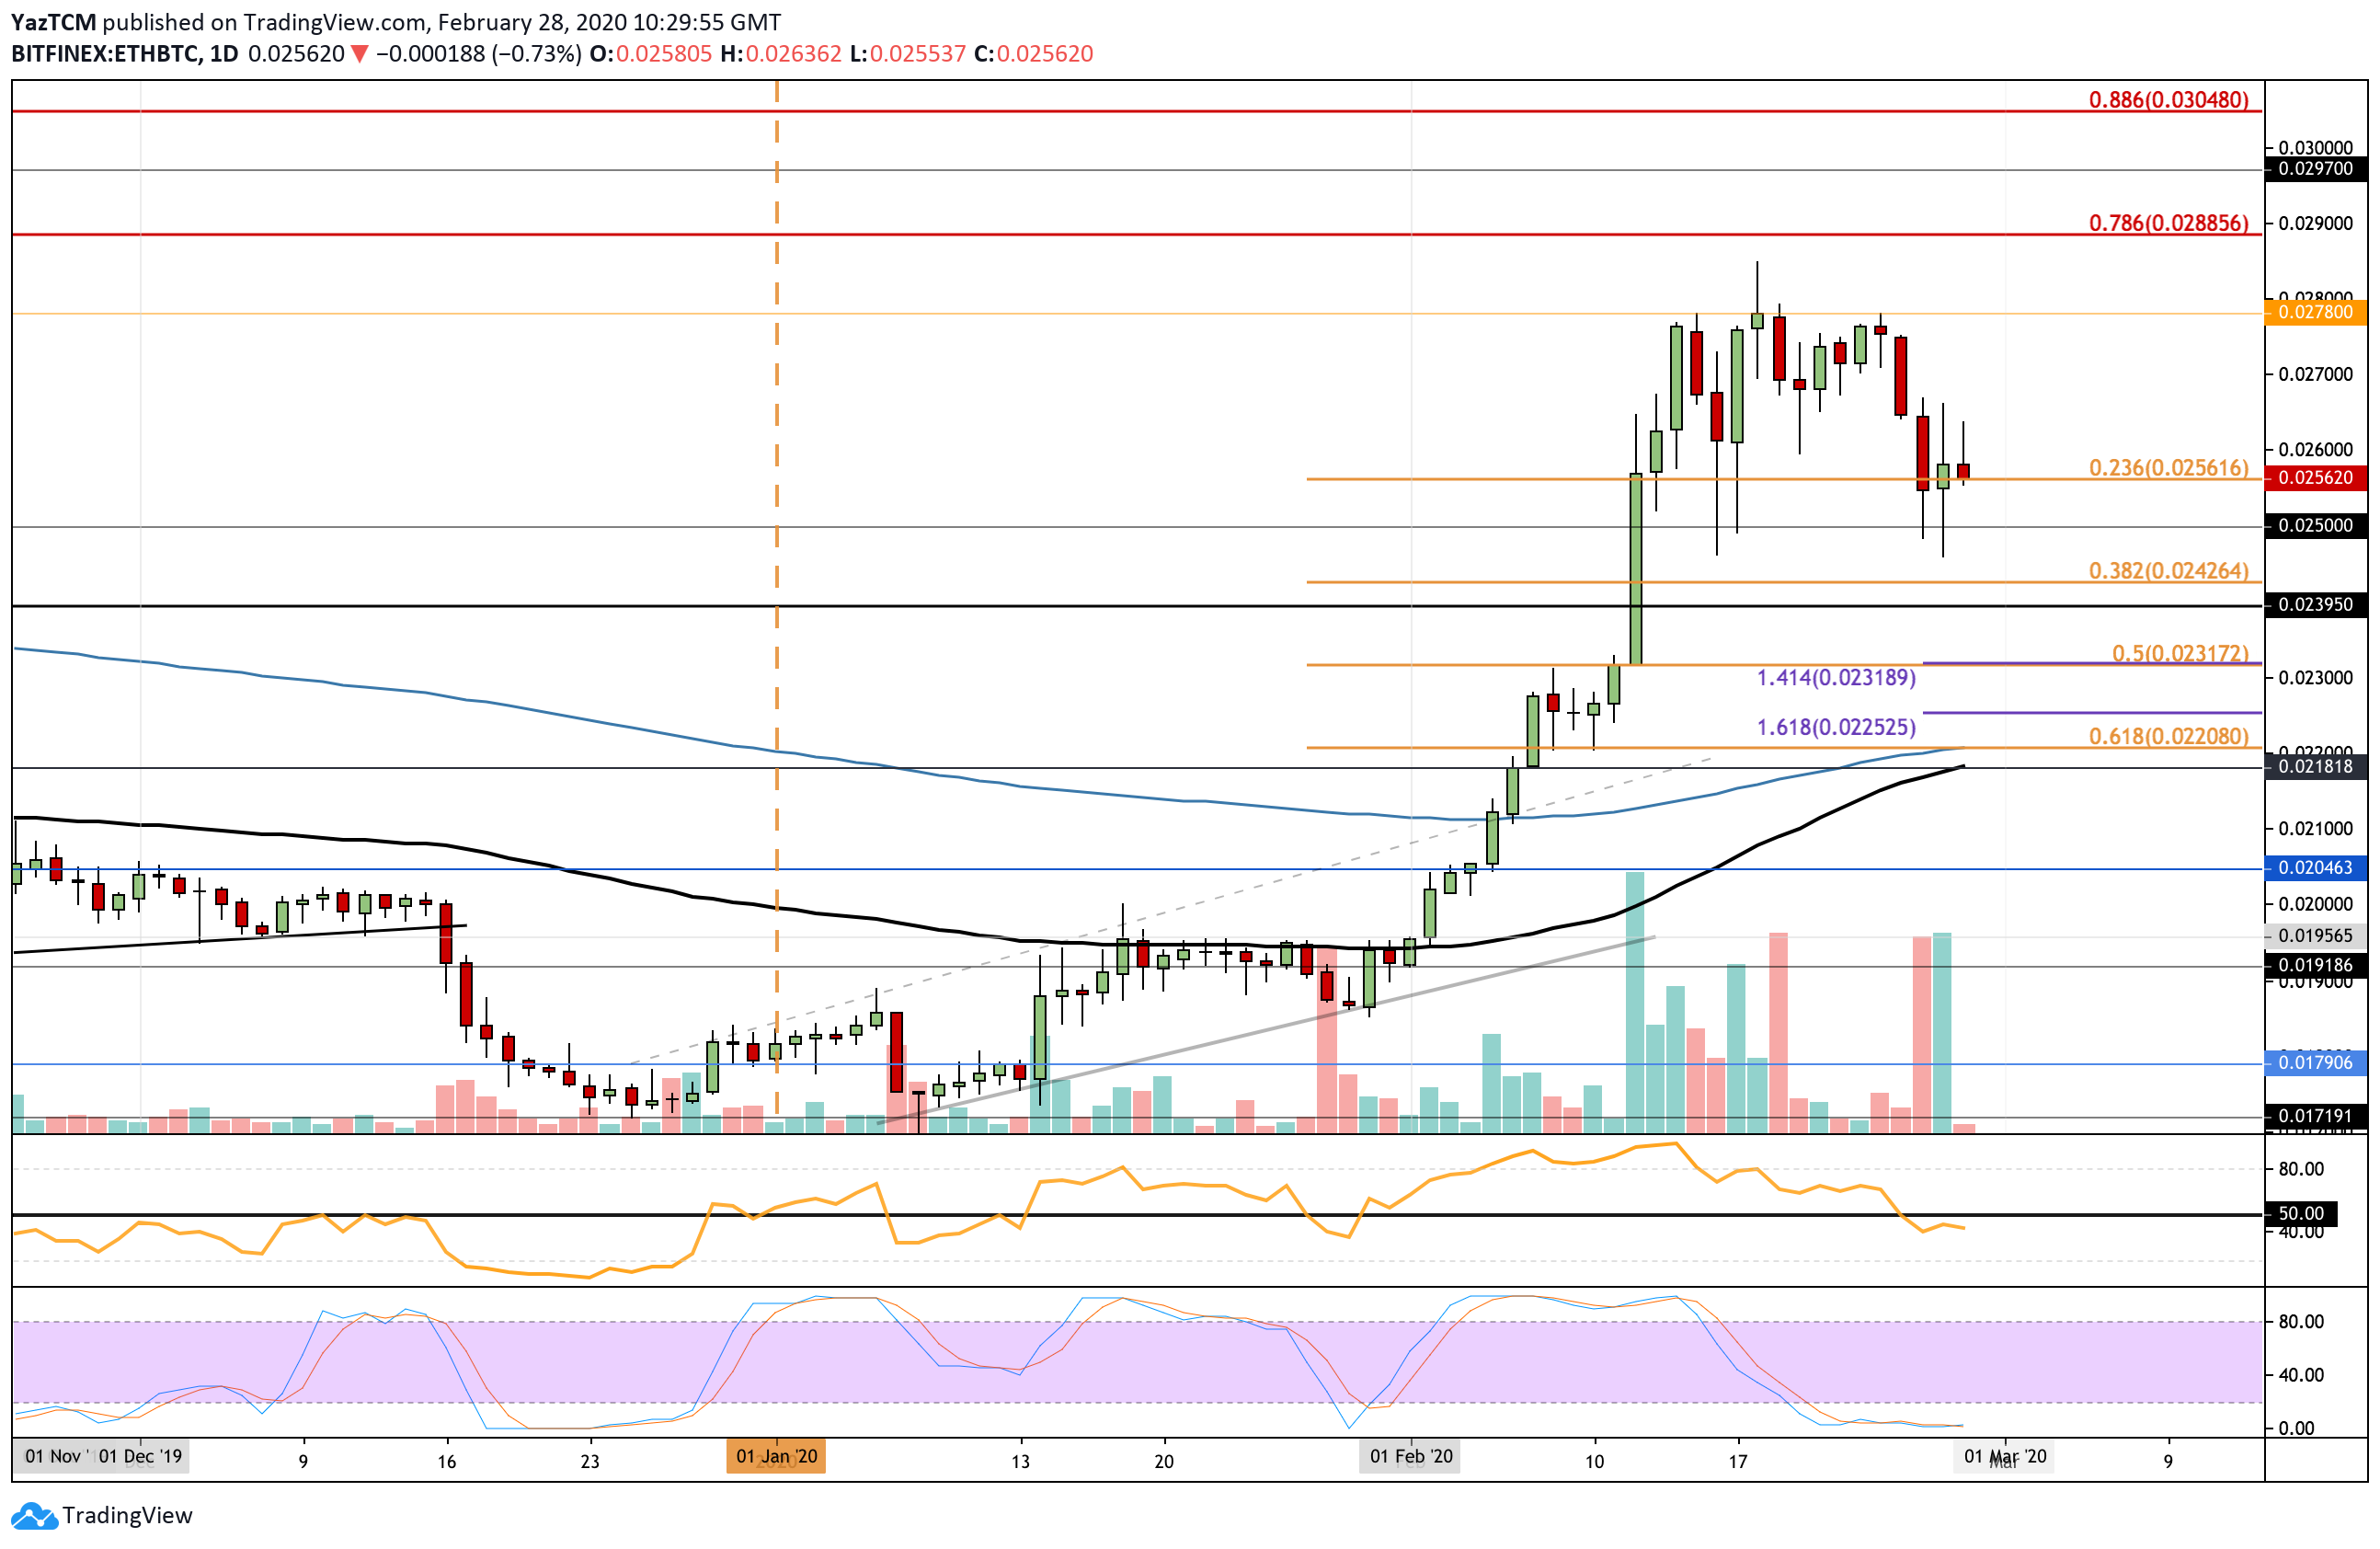 Crypto Price Analysis & Overview February 28th: Bitcoin, Ethereum, Ripple, Bitcoin Cash, and Chainlink